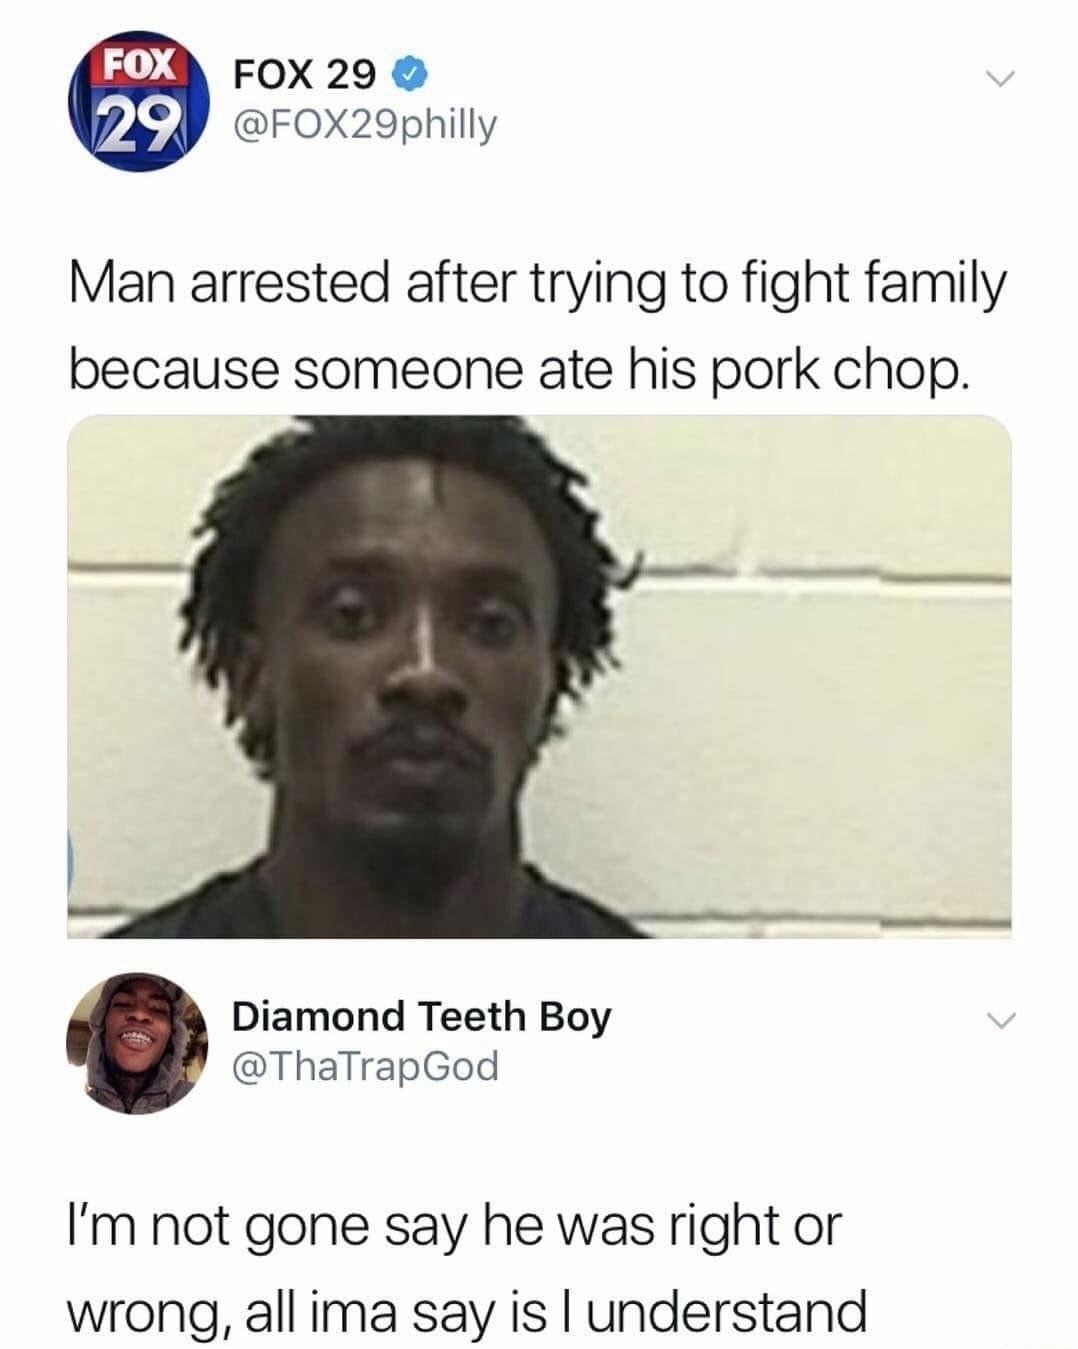 pork chop meme - Fox 29 Fox 29 Man arrested after trying to fight family because someone ate his pork chop. Diamond Teeth Boy I'm not gone say he was right or wrong, all ima say is I understand